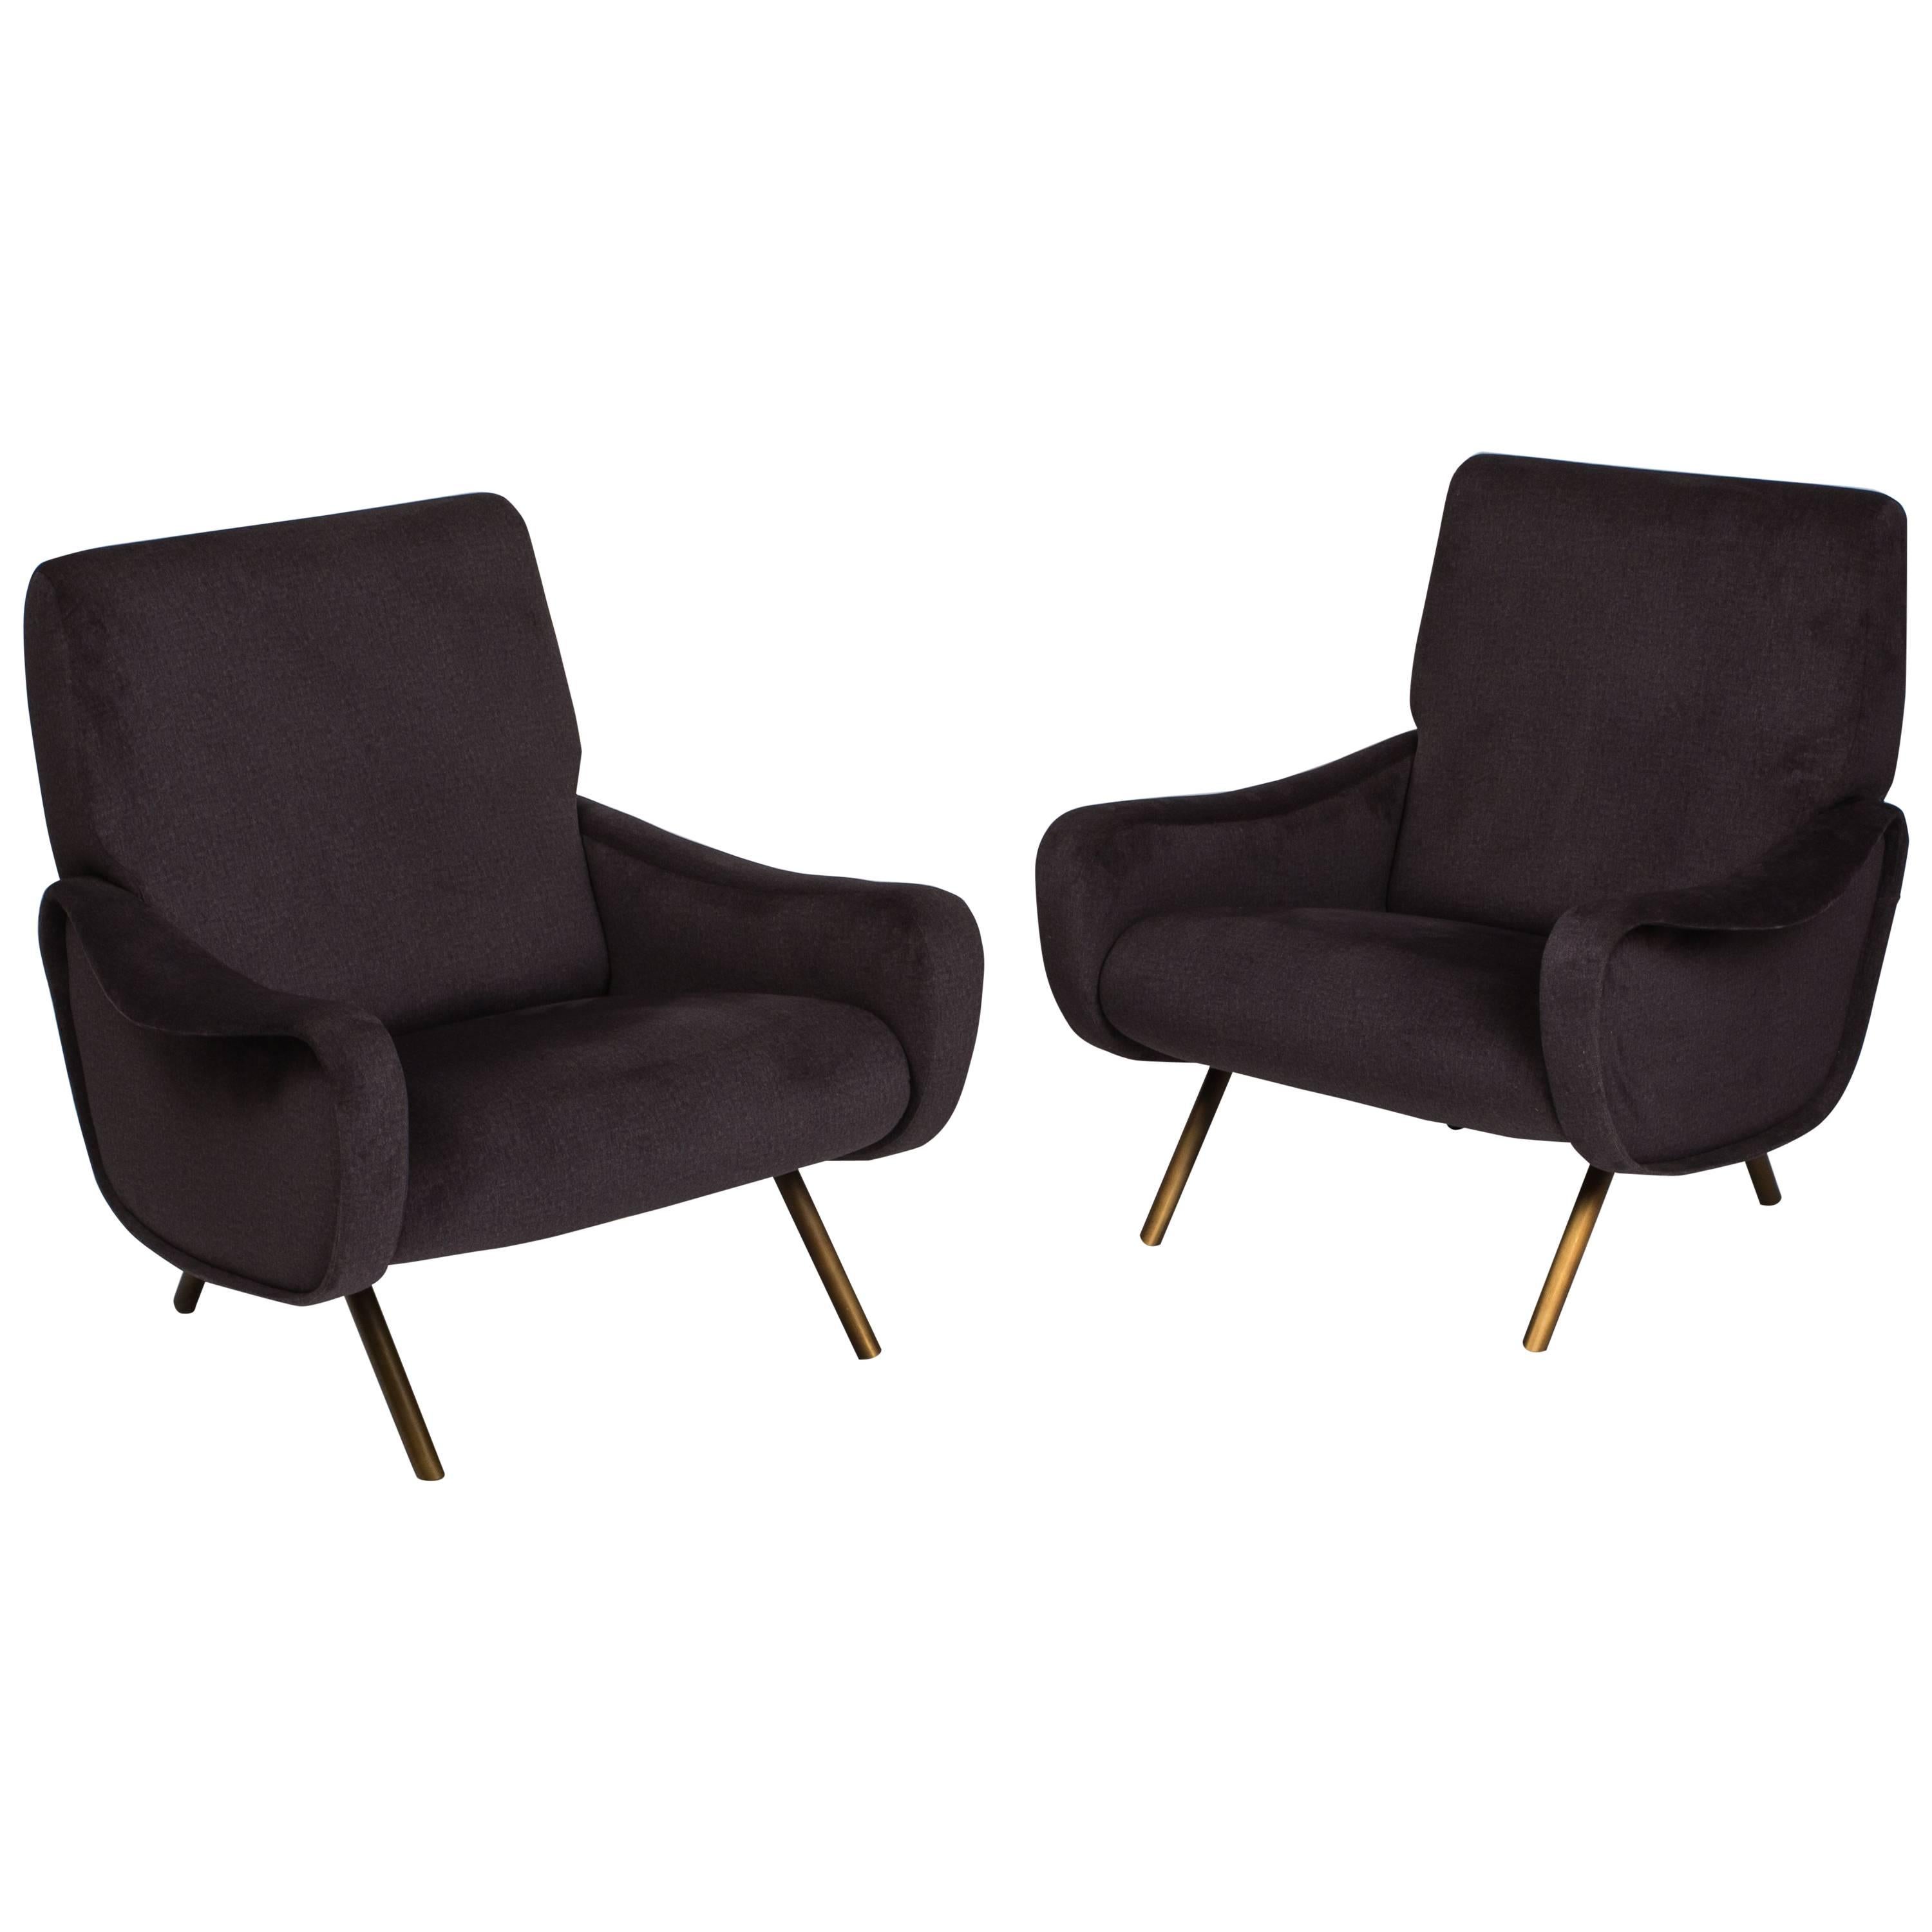 Marco Zanuso Pair of "Lady" Armchairs